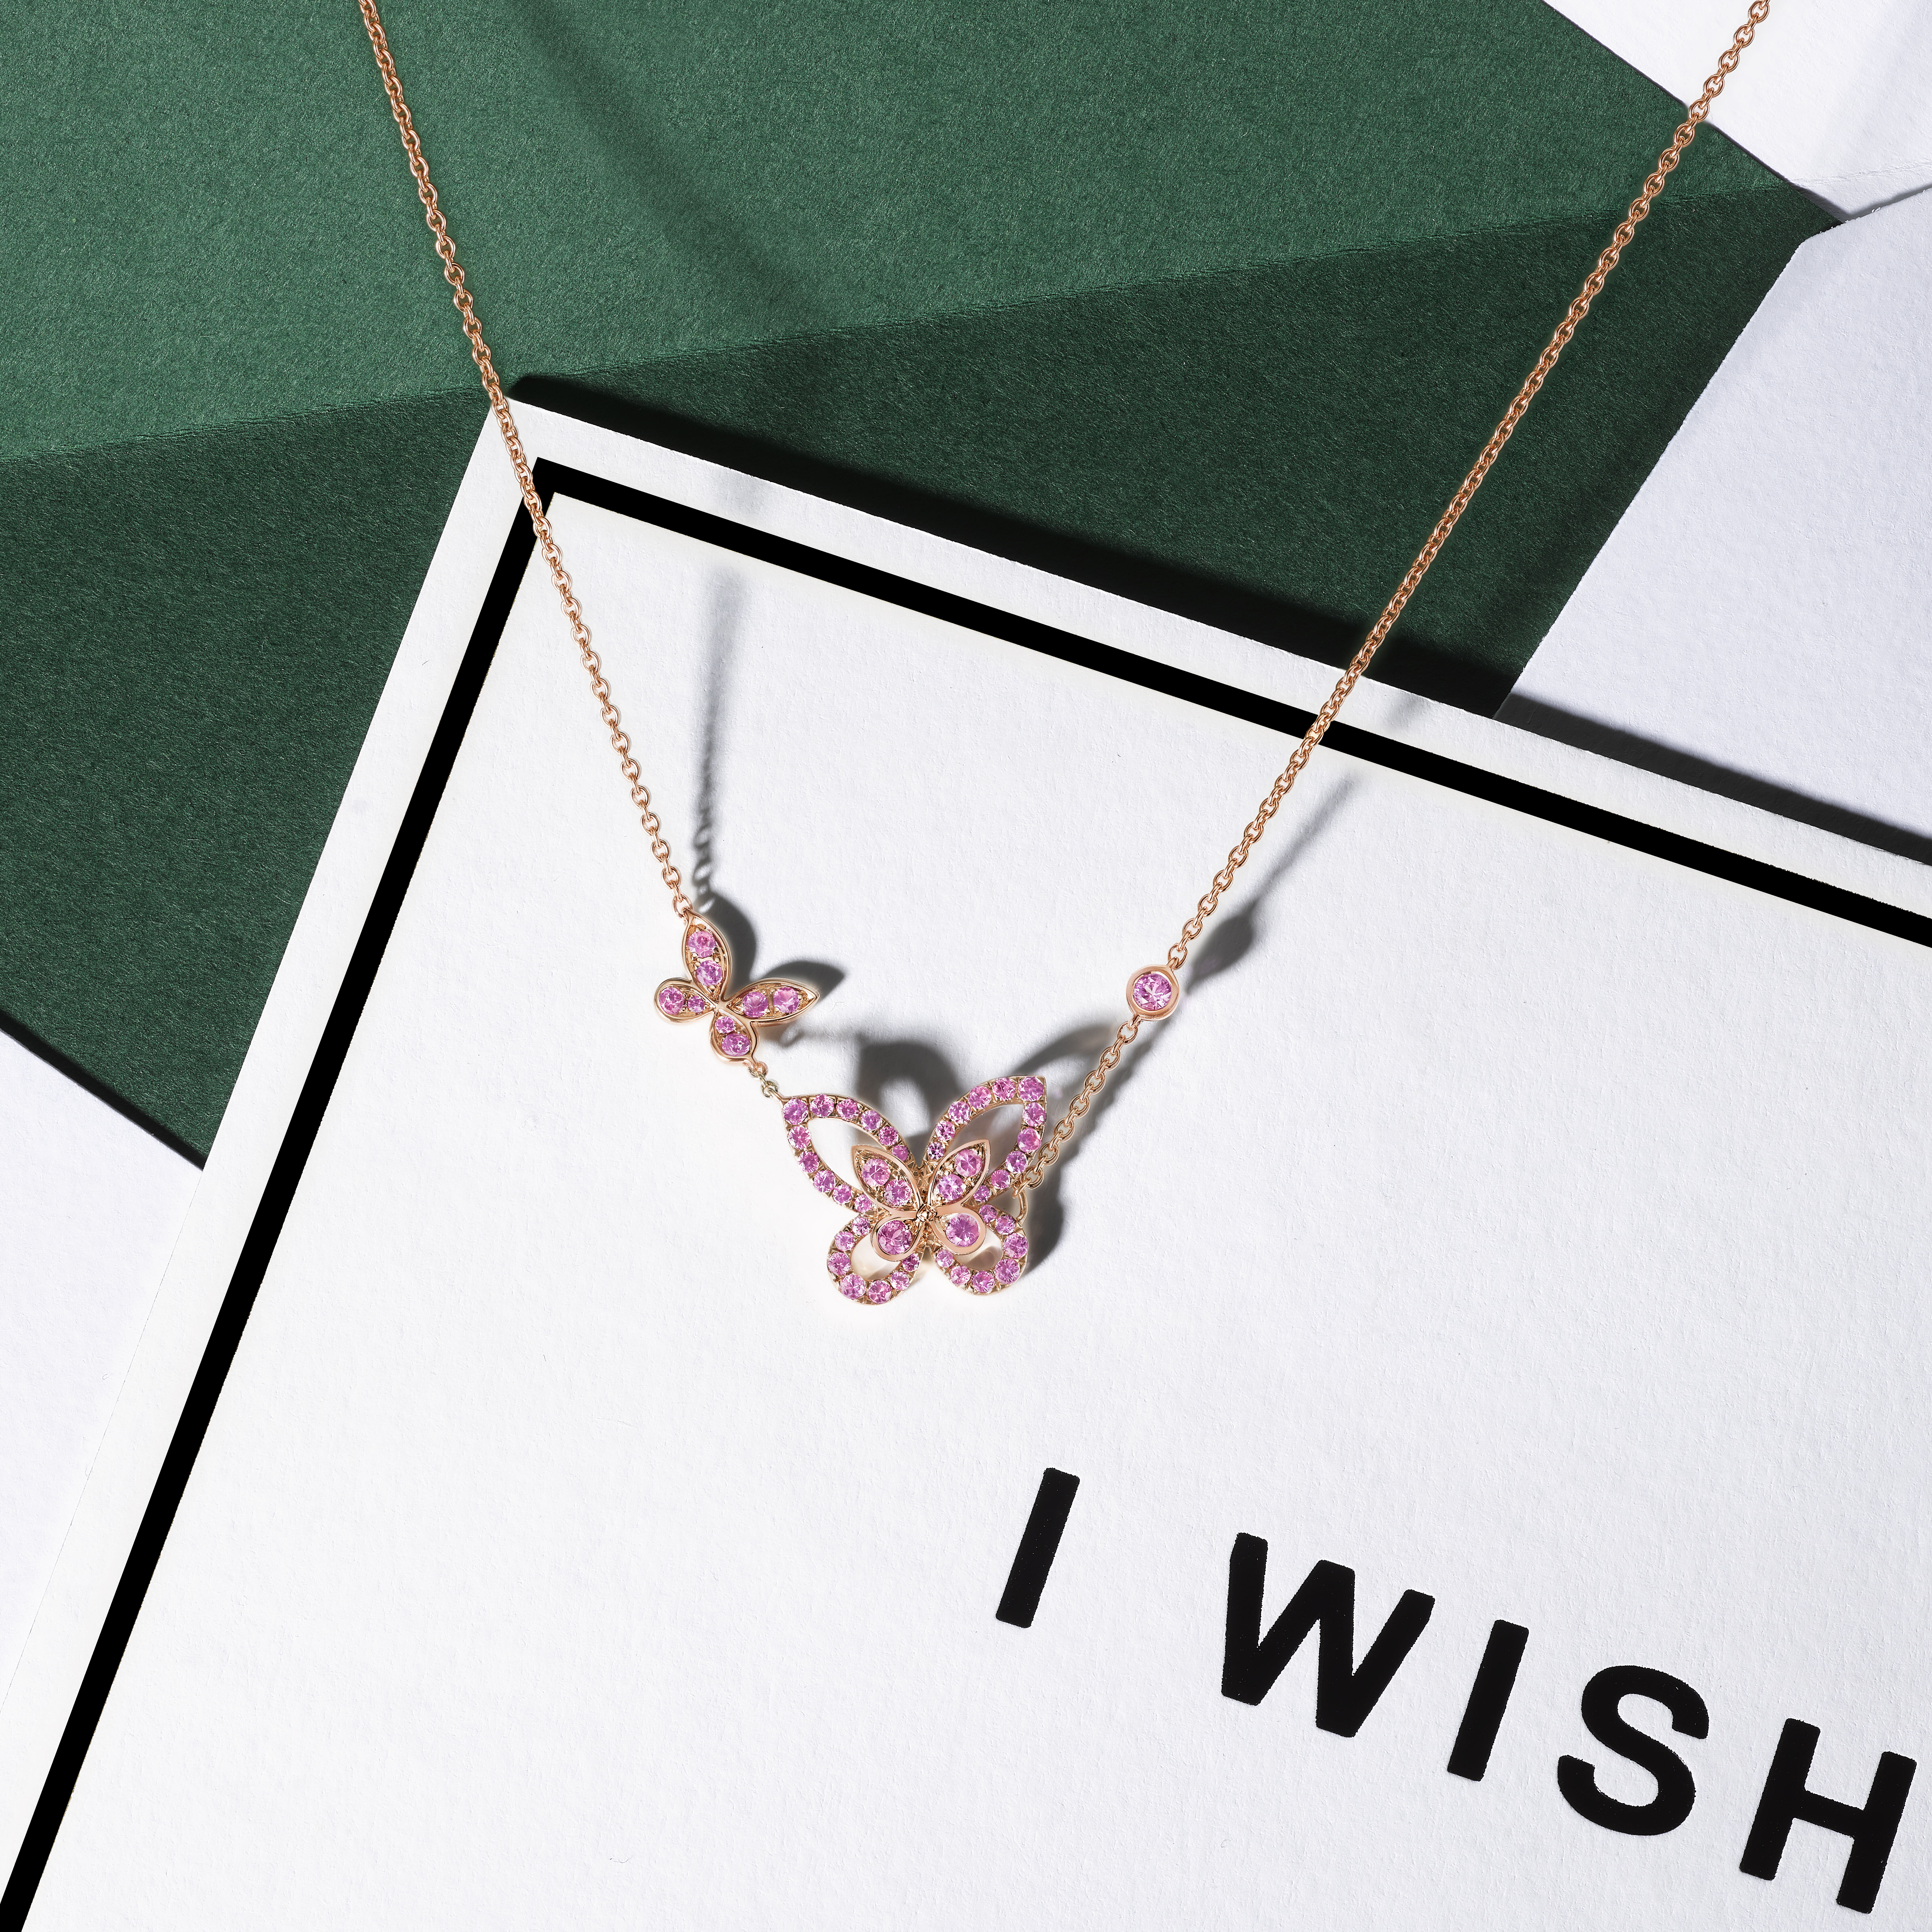 Still life image of Graff diamond collection Rose Gold and Pink Sapphire Butterfly Silhouette necklace positioned on an 'I WISH' festive greetings card